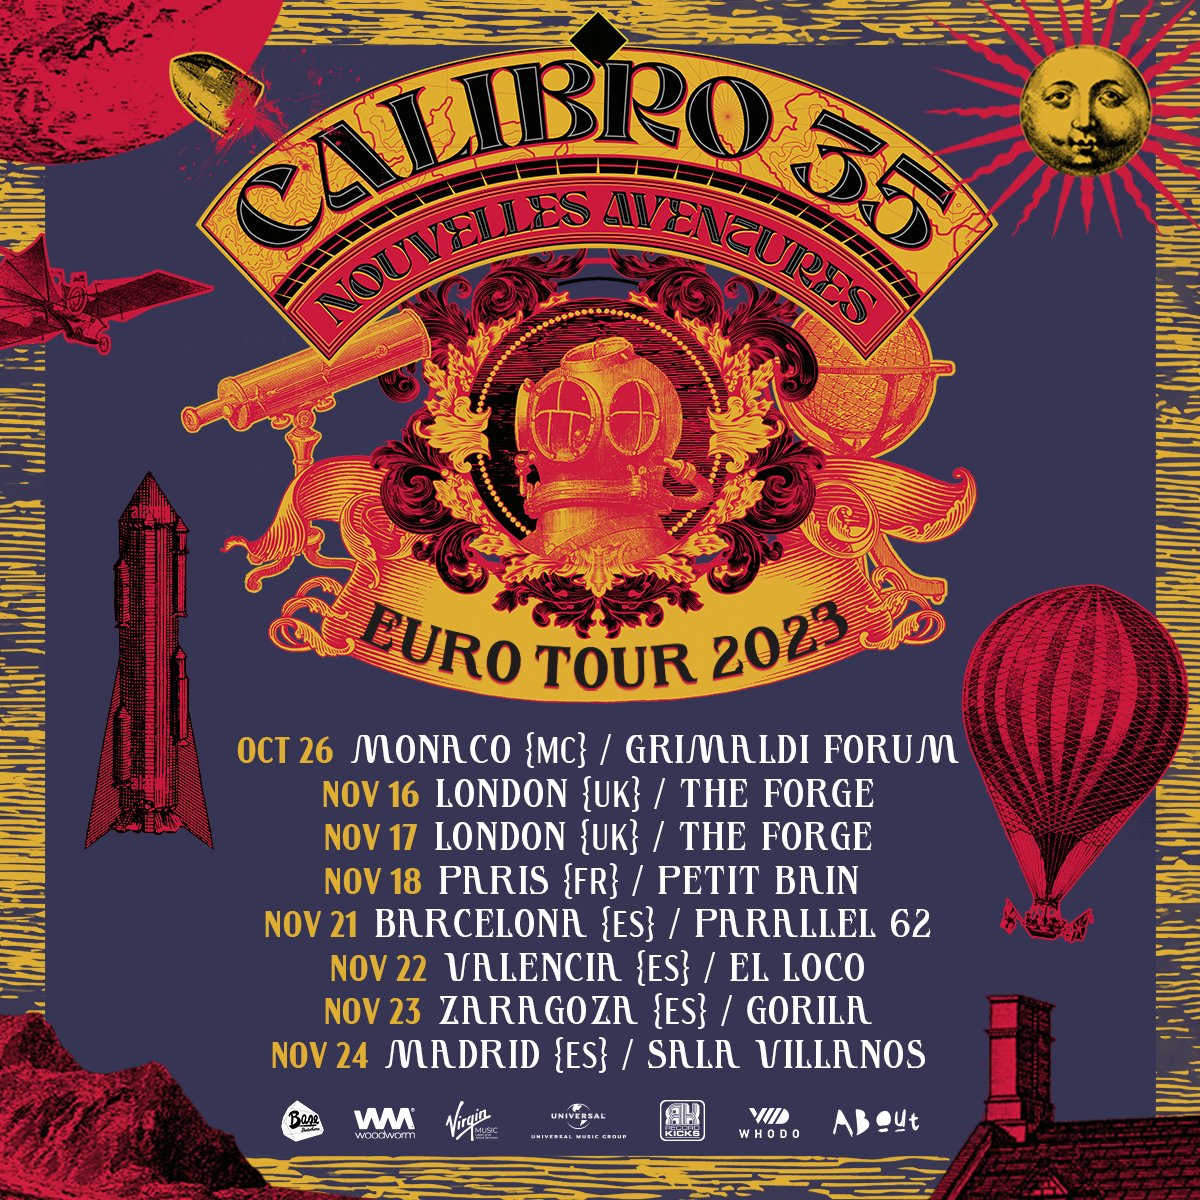 #CALIBRO35’s EU/UK TOUR resumes in 2 days! Don't miss the chance to hear the new album NOUVELLES AVENTURES (& more) live, check out the shows. Including #London, #Paris, #Barcelona, #Madrid & more! ➡️ Album out now bit.ly/OrderNouvelles… ➡️ Tour Tickets: linktr.ee/calibro.euroto…